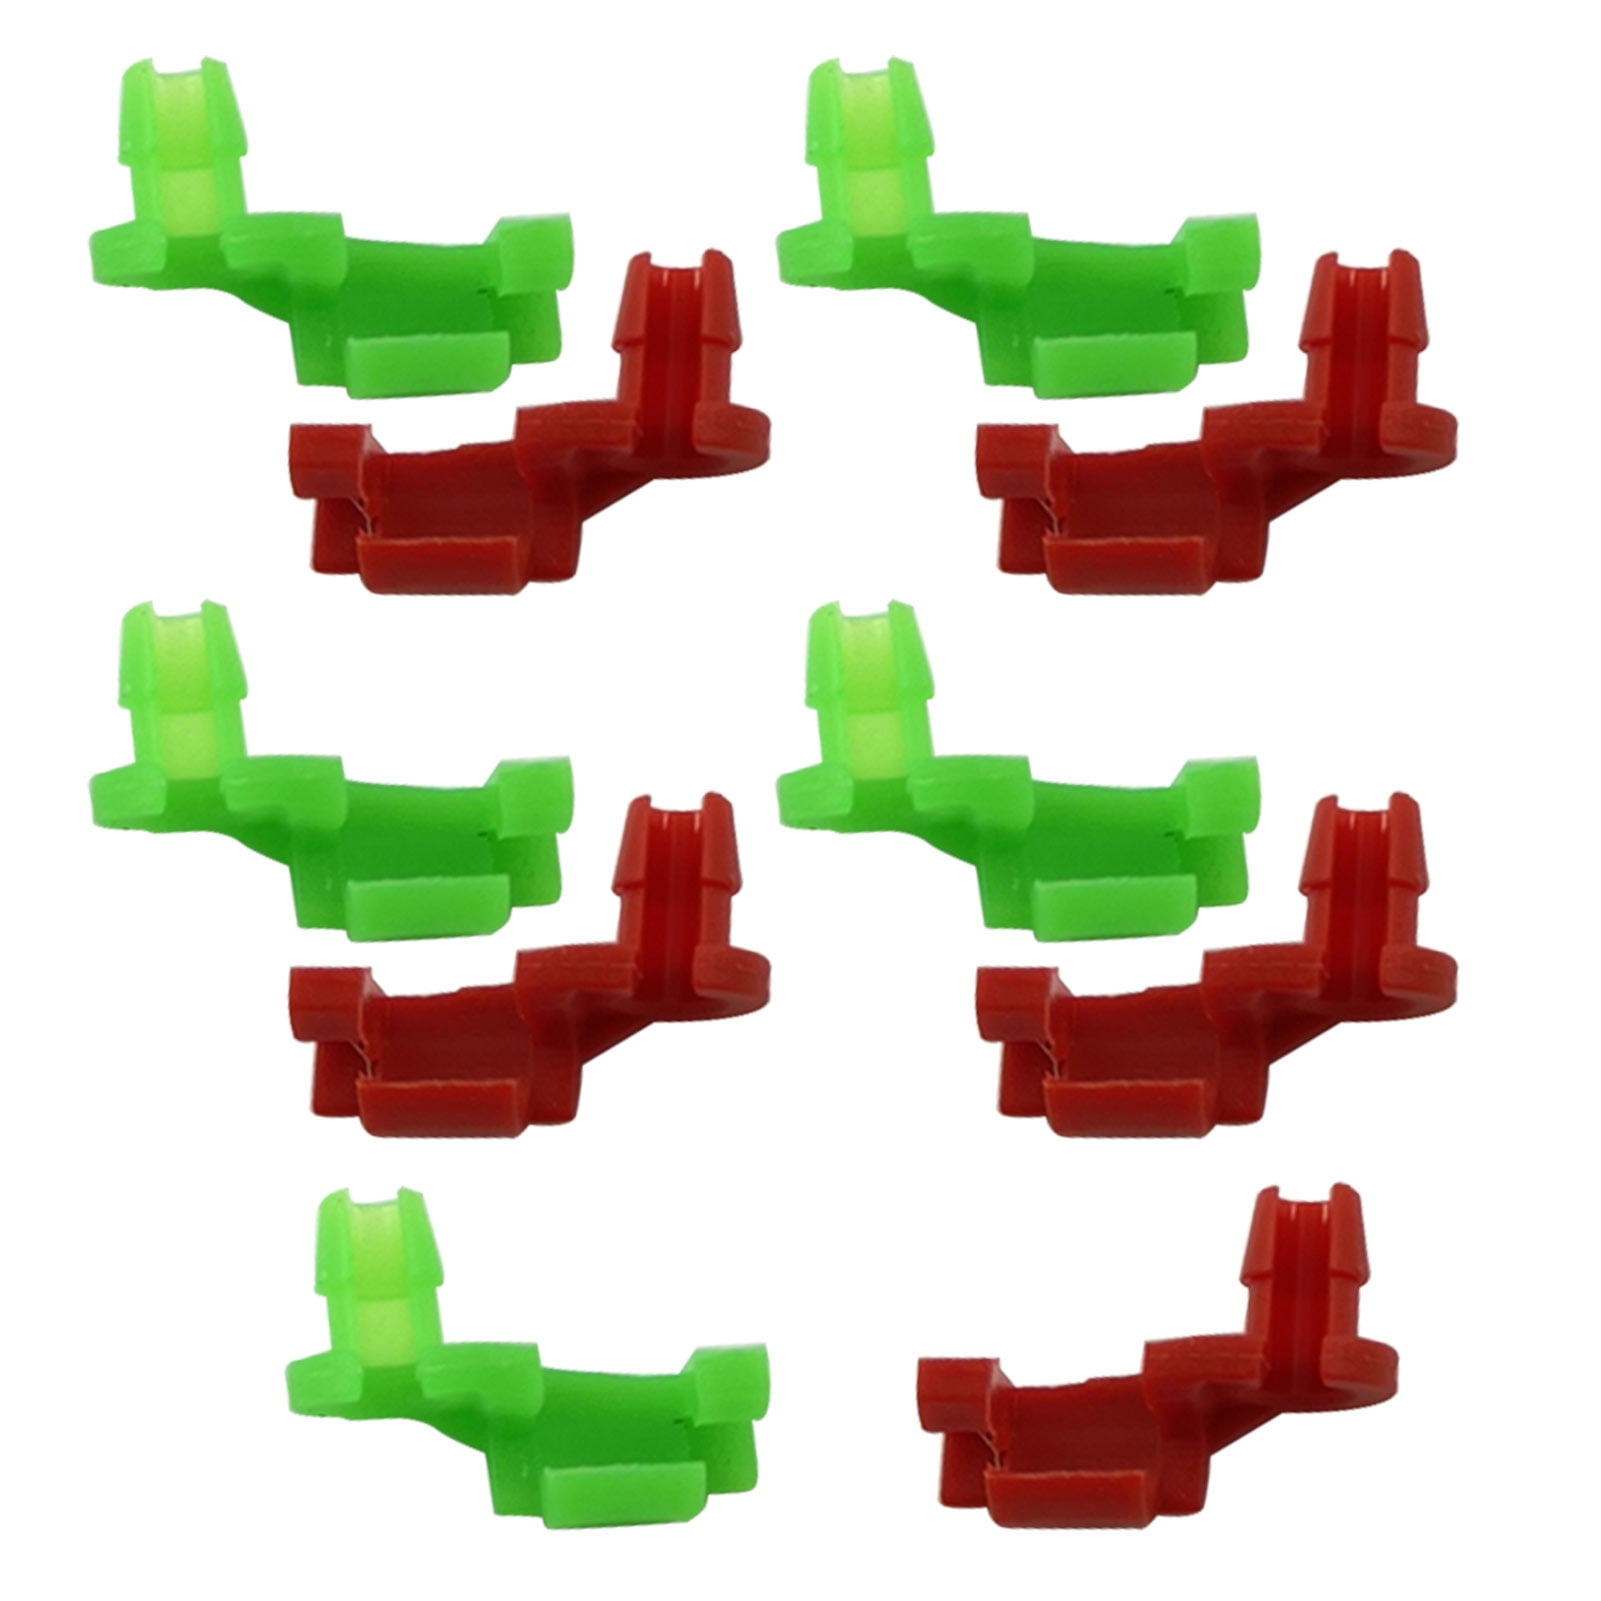 Outside Exterior Outer Door Handle/Tailgate Handle Rod Retainer Clips 1pc Red PT Auto Warehouse CPA3523-FTG Replaces # 88981030 1pc Green Replaces # 88981031 